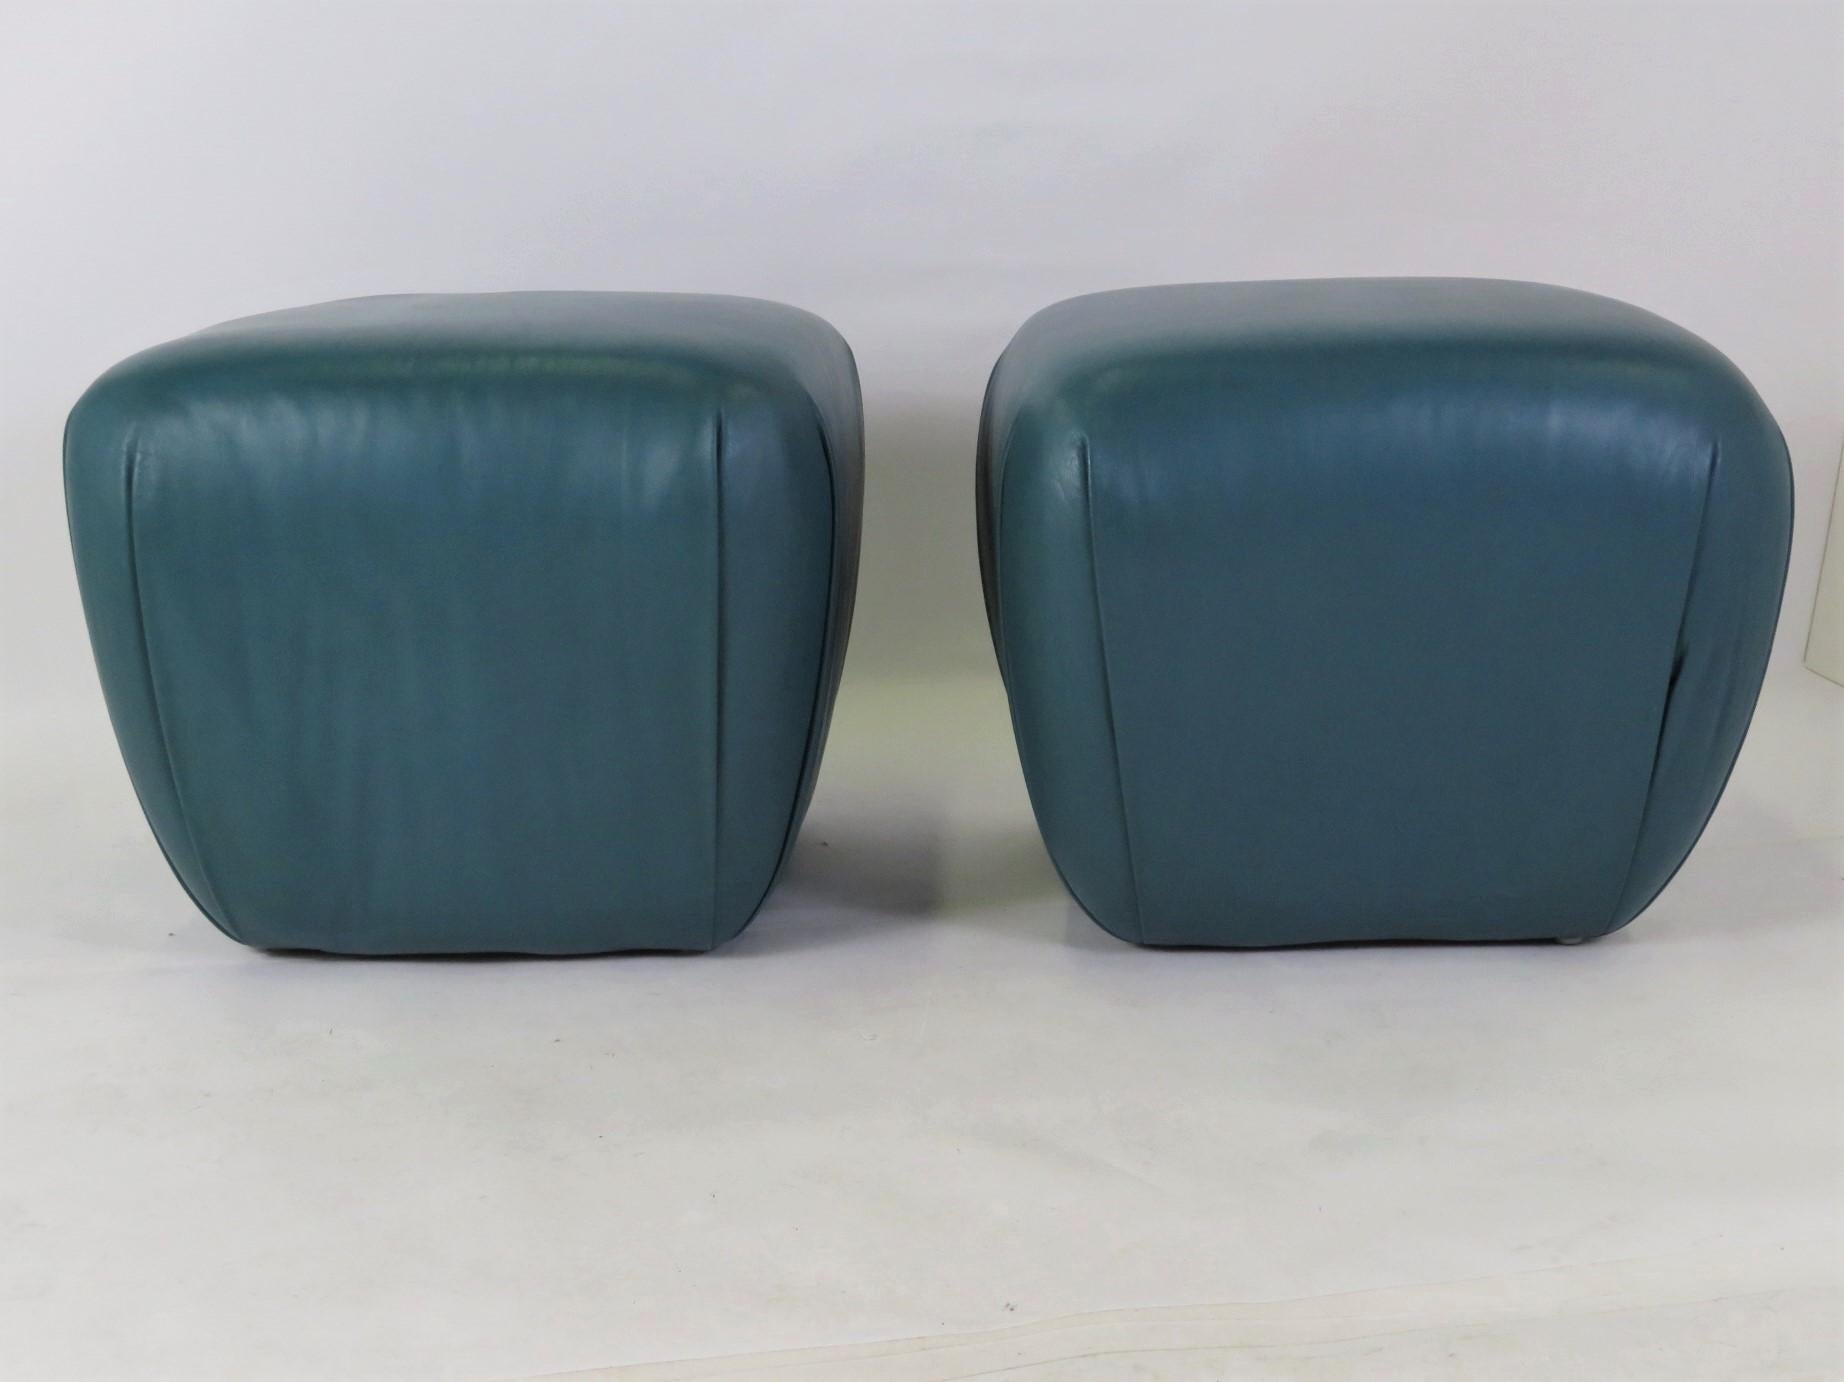 American Modern Pair of Teal Leather Ottomans Stools in the Style of Karl Springer, 1980s